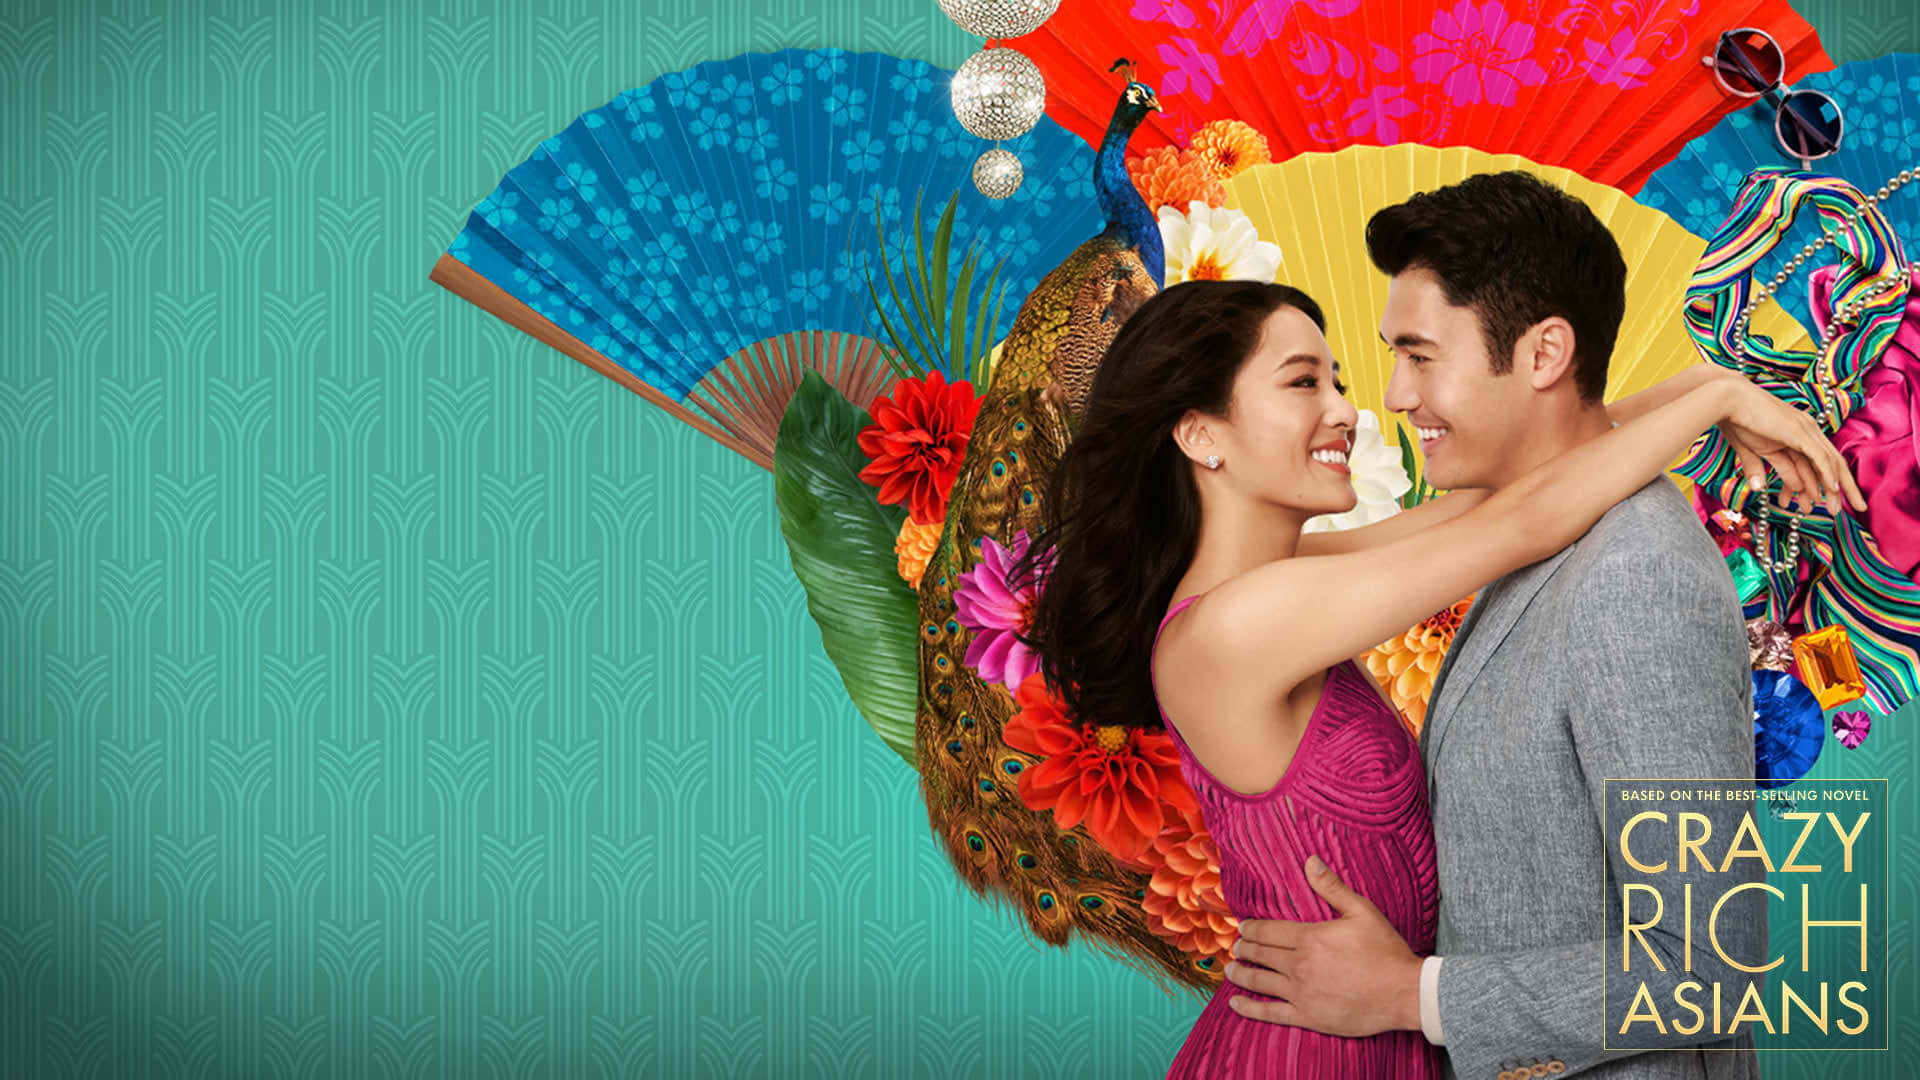 Celebrating the love story of Rachel and Nick from Crazy Rich Asians